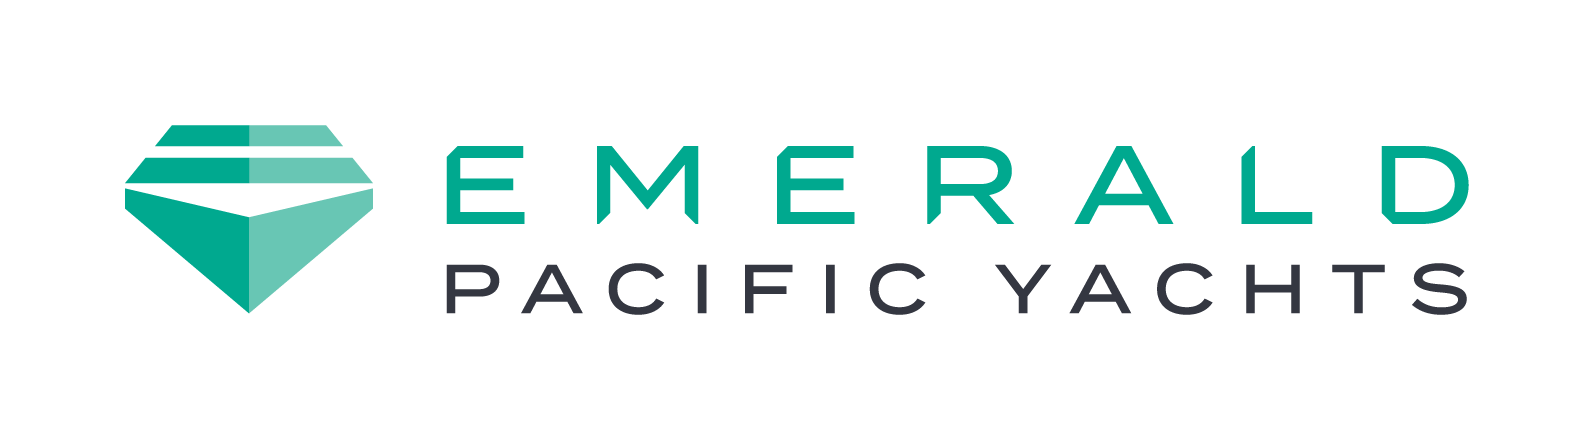 Emerald Pacific Yachts